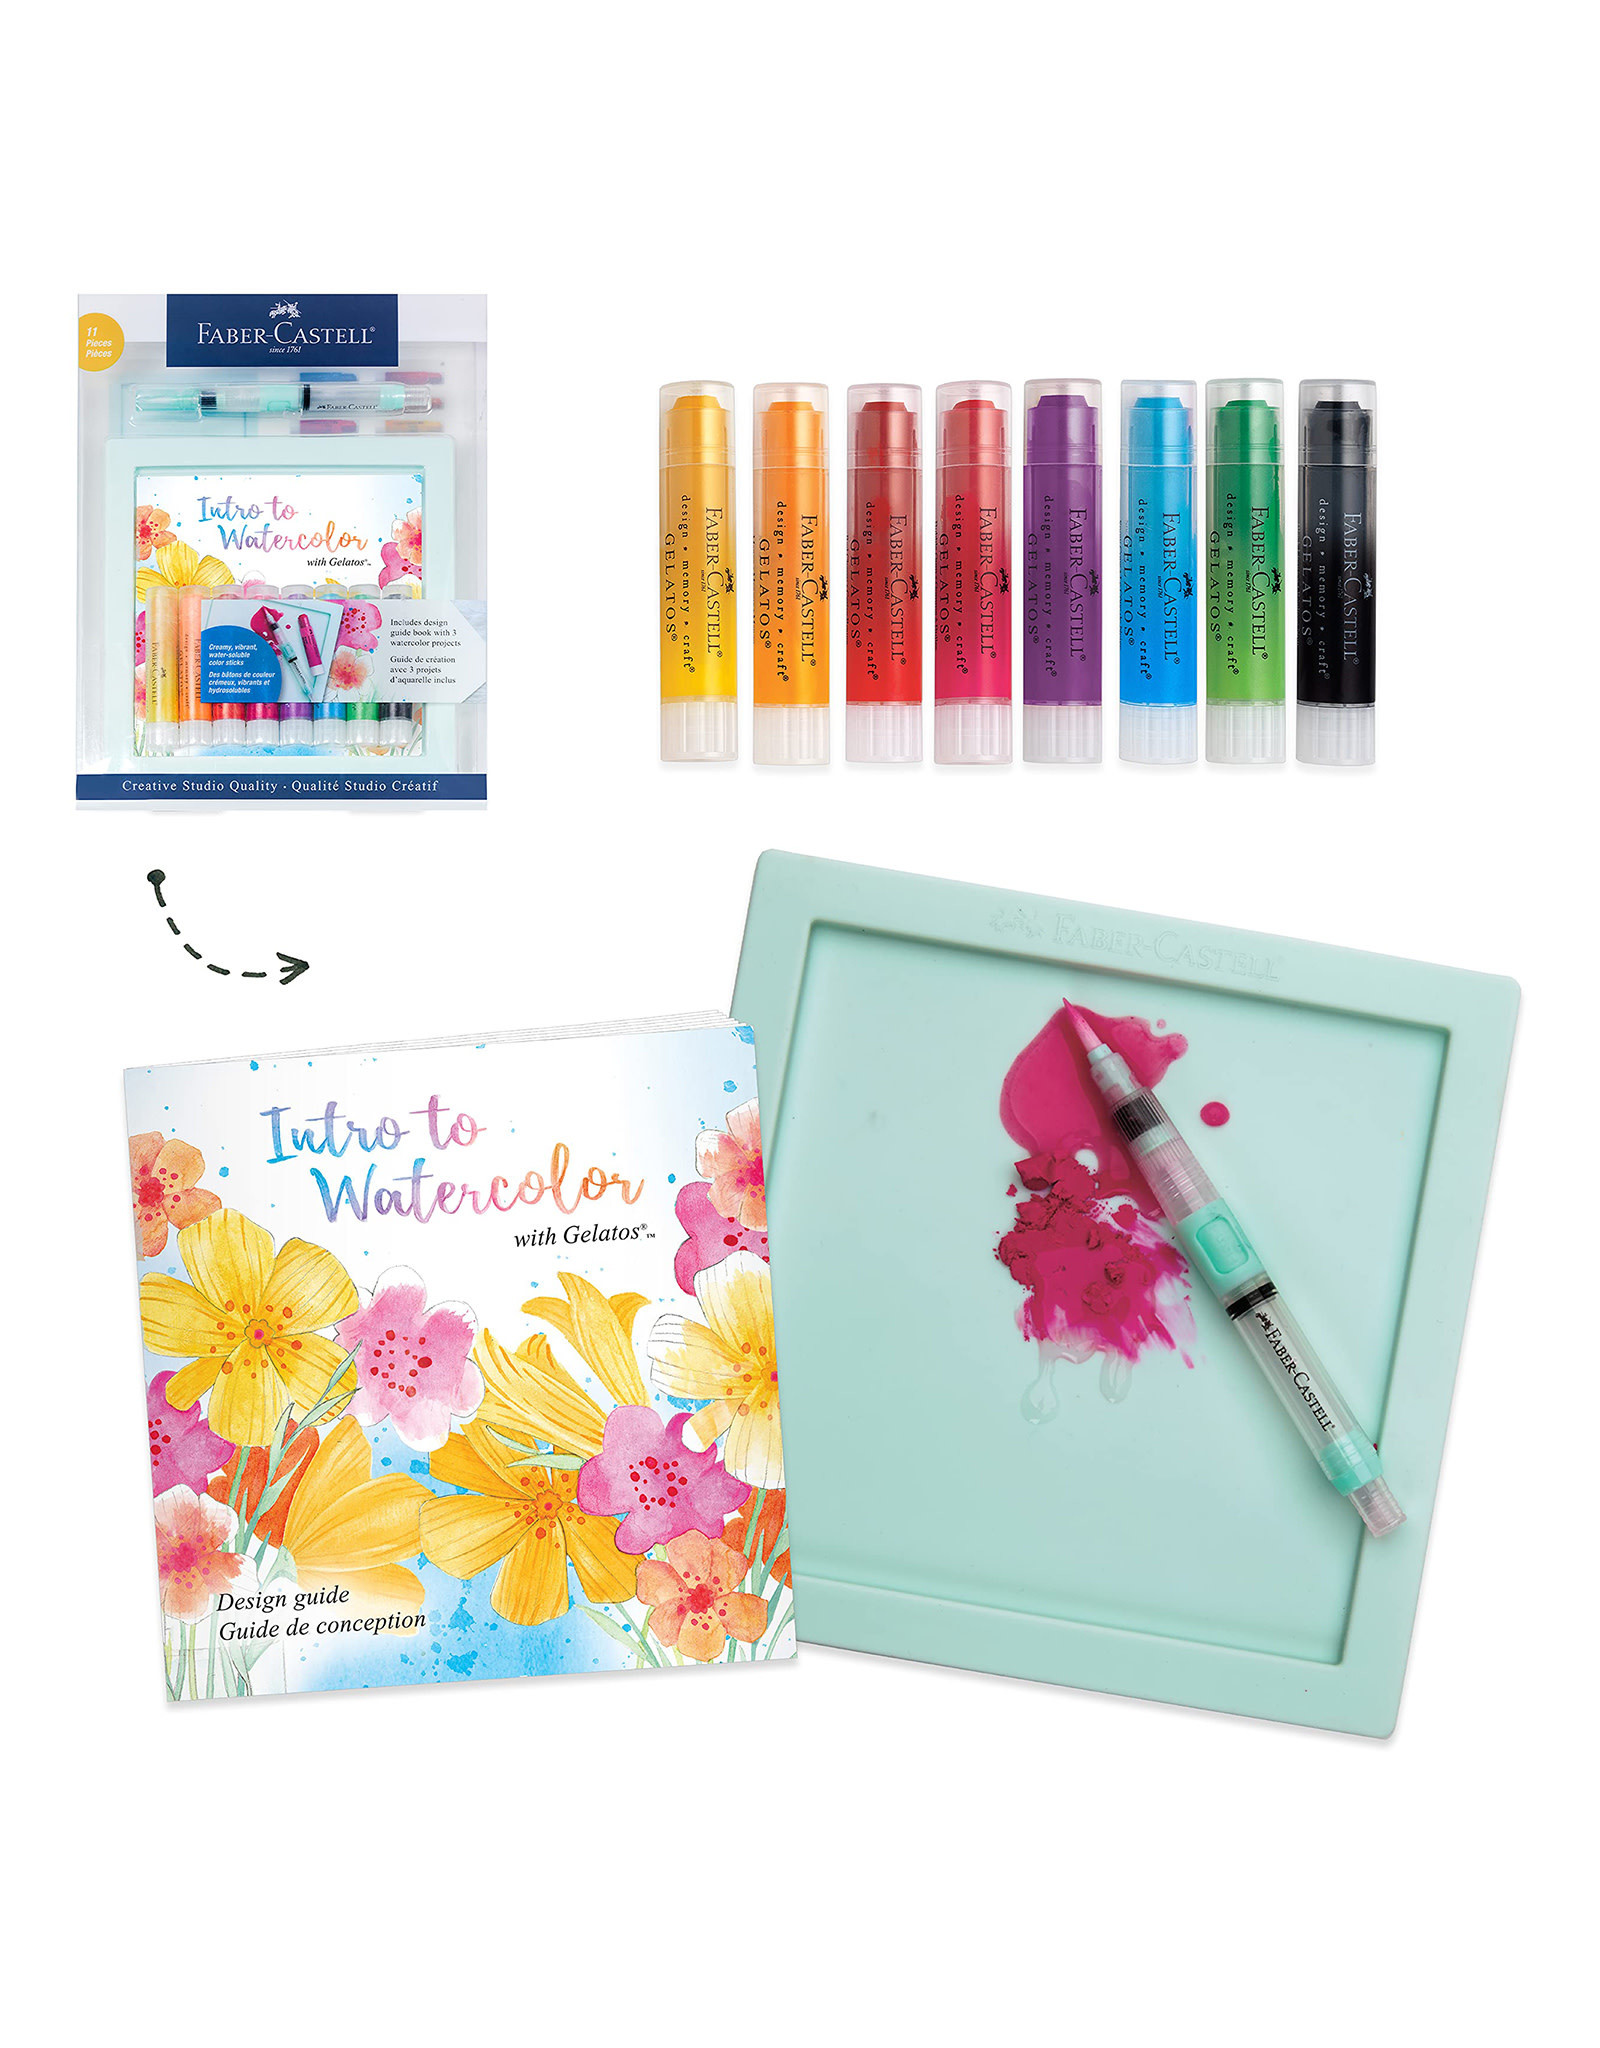 FABER-CASTELL Intro to Watercolor with Gelatos